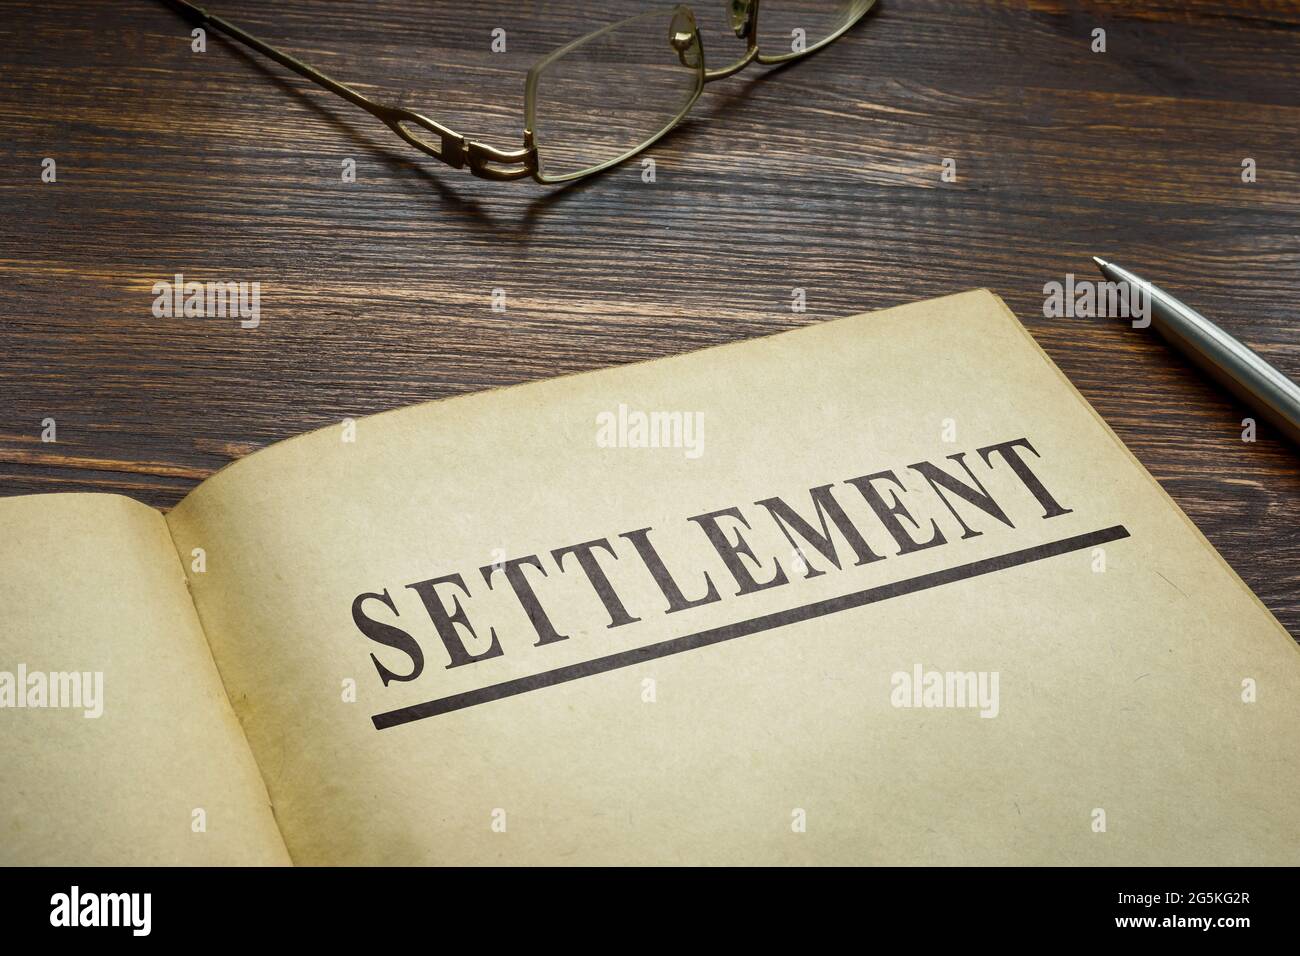 The Book about settlement and old glasses. Stock Photo